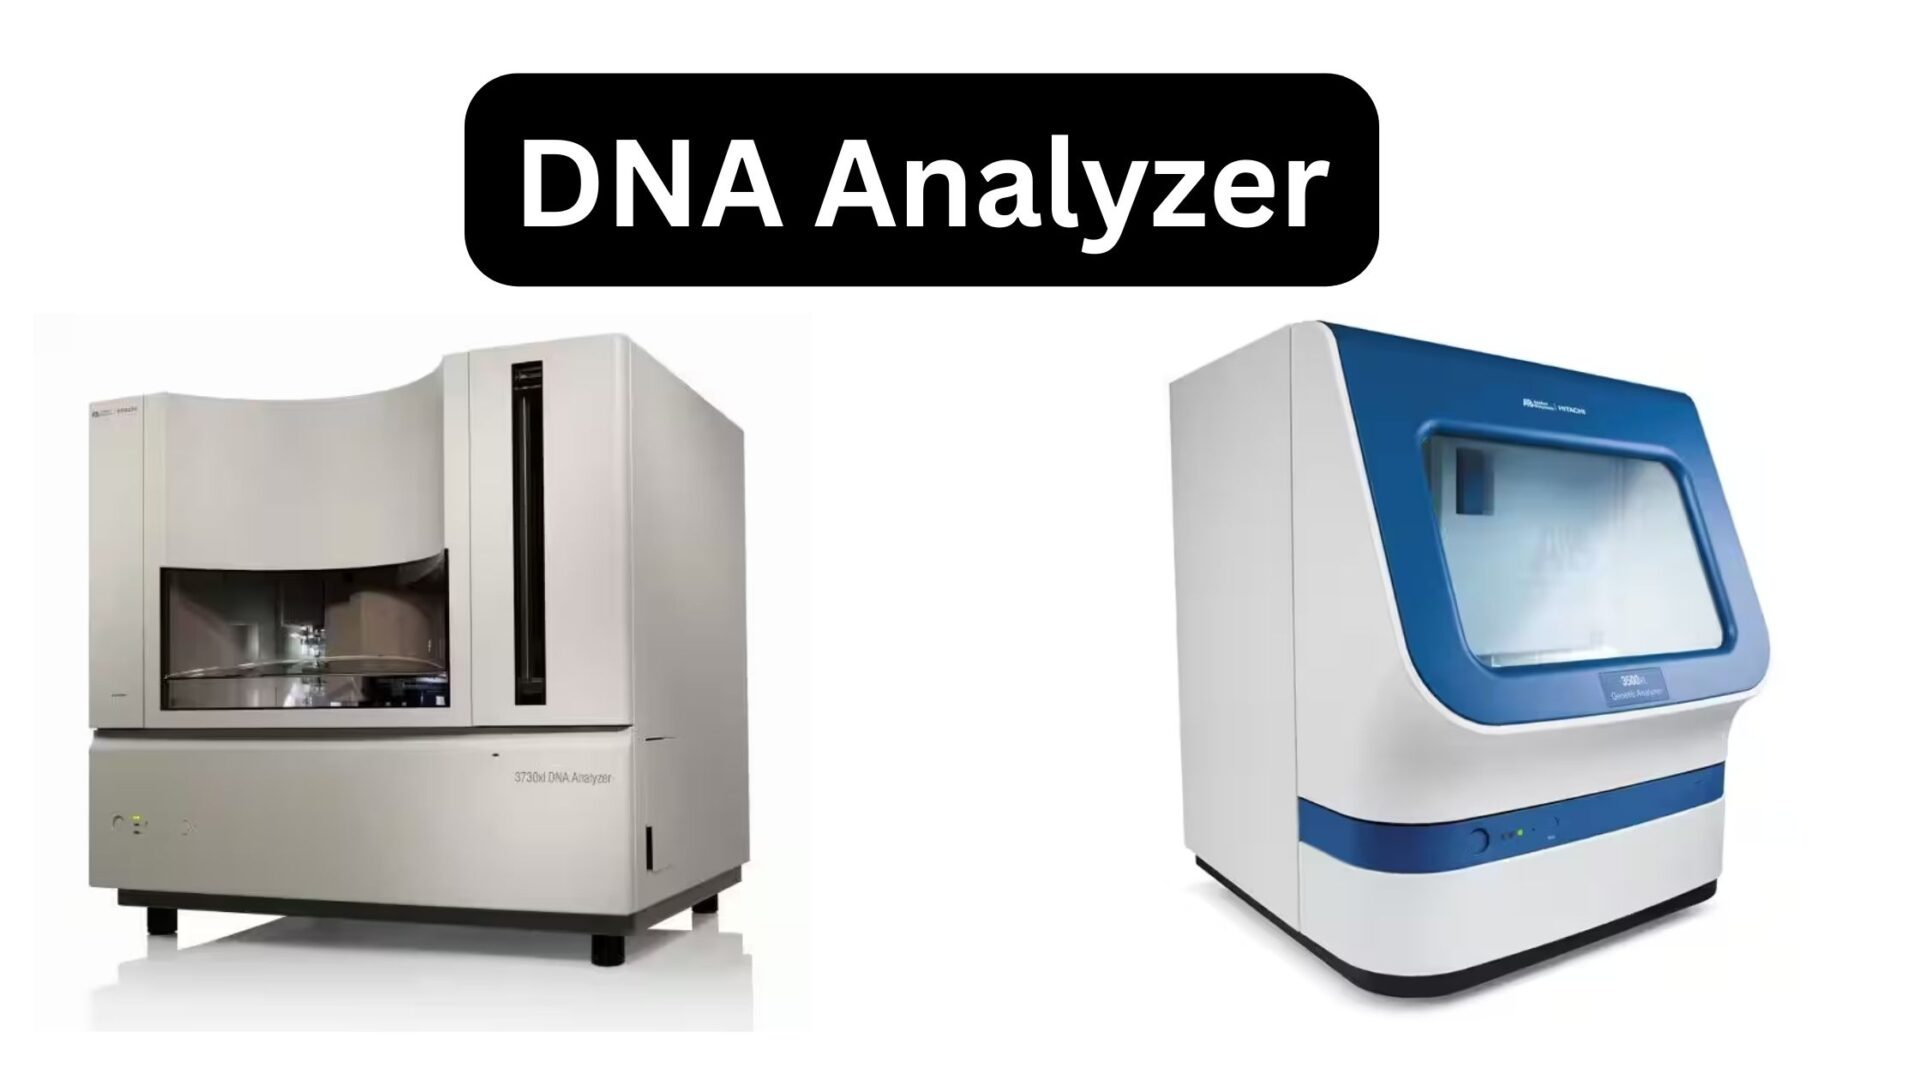 DNA Analyzer - Principle, Parts, Operating, Applications